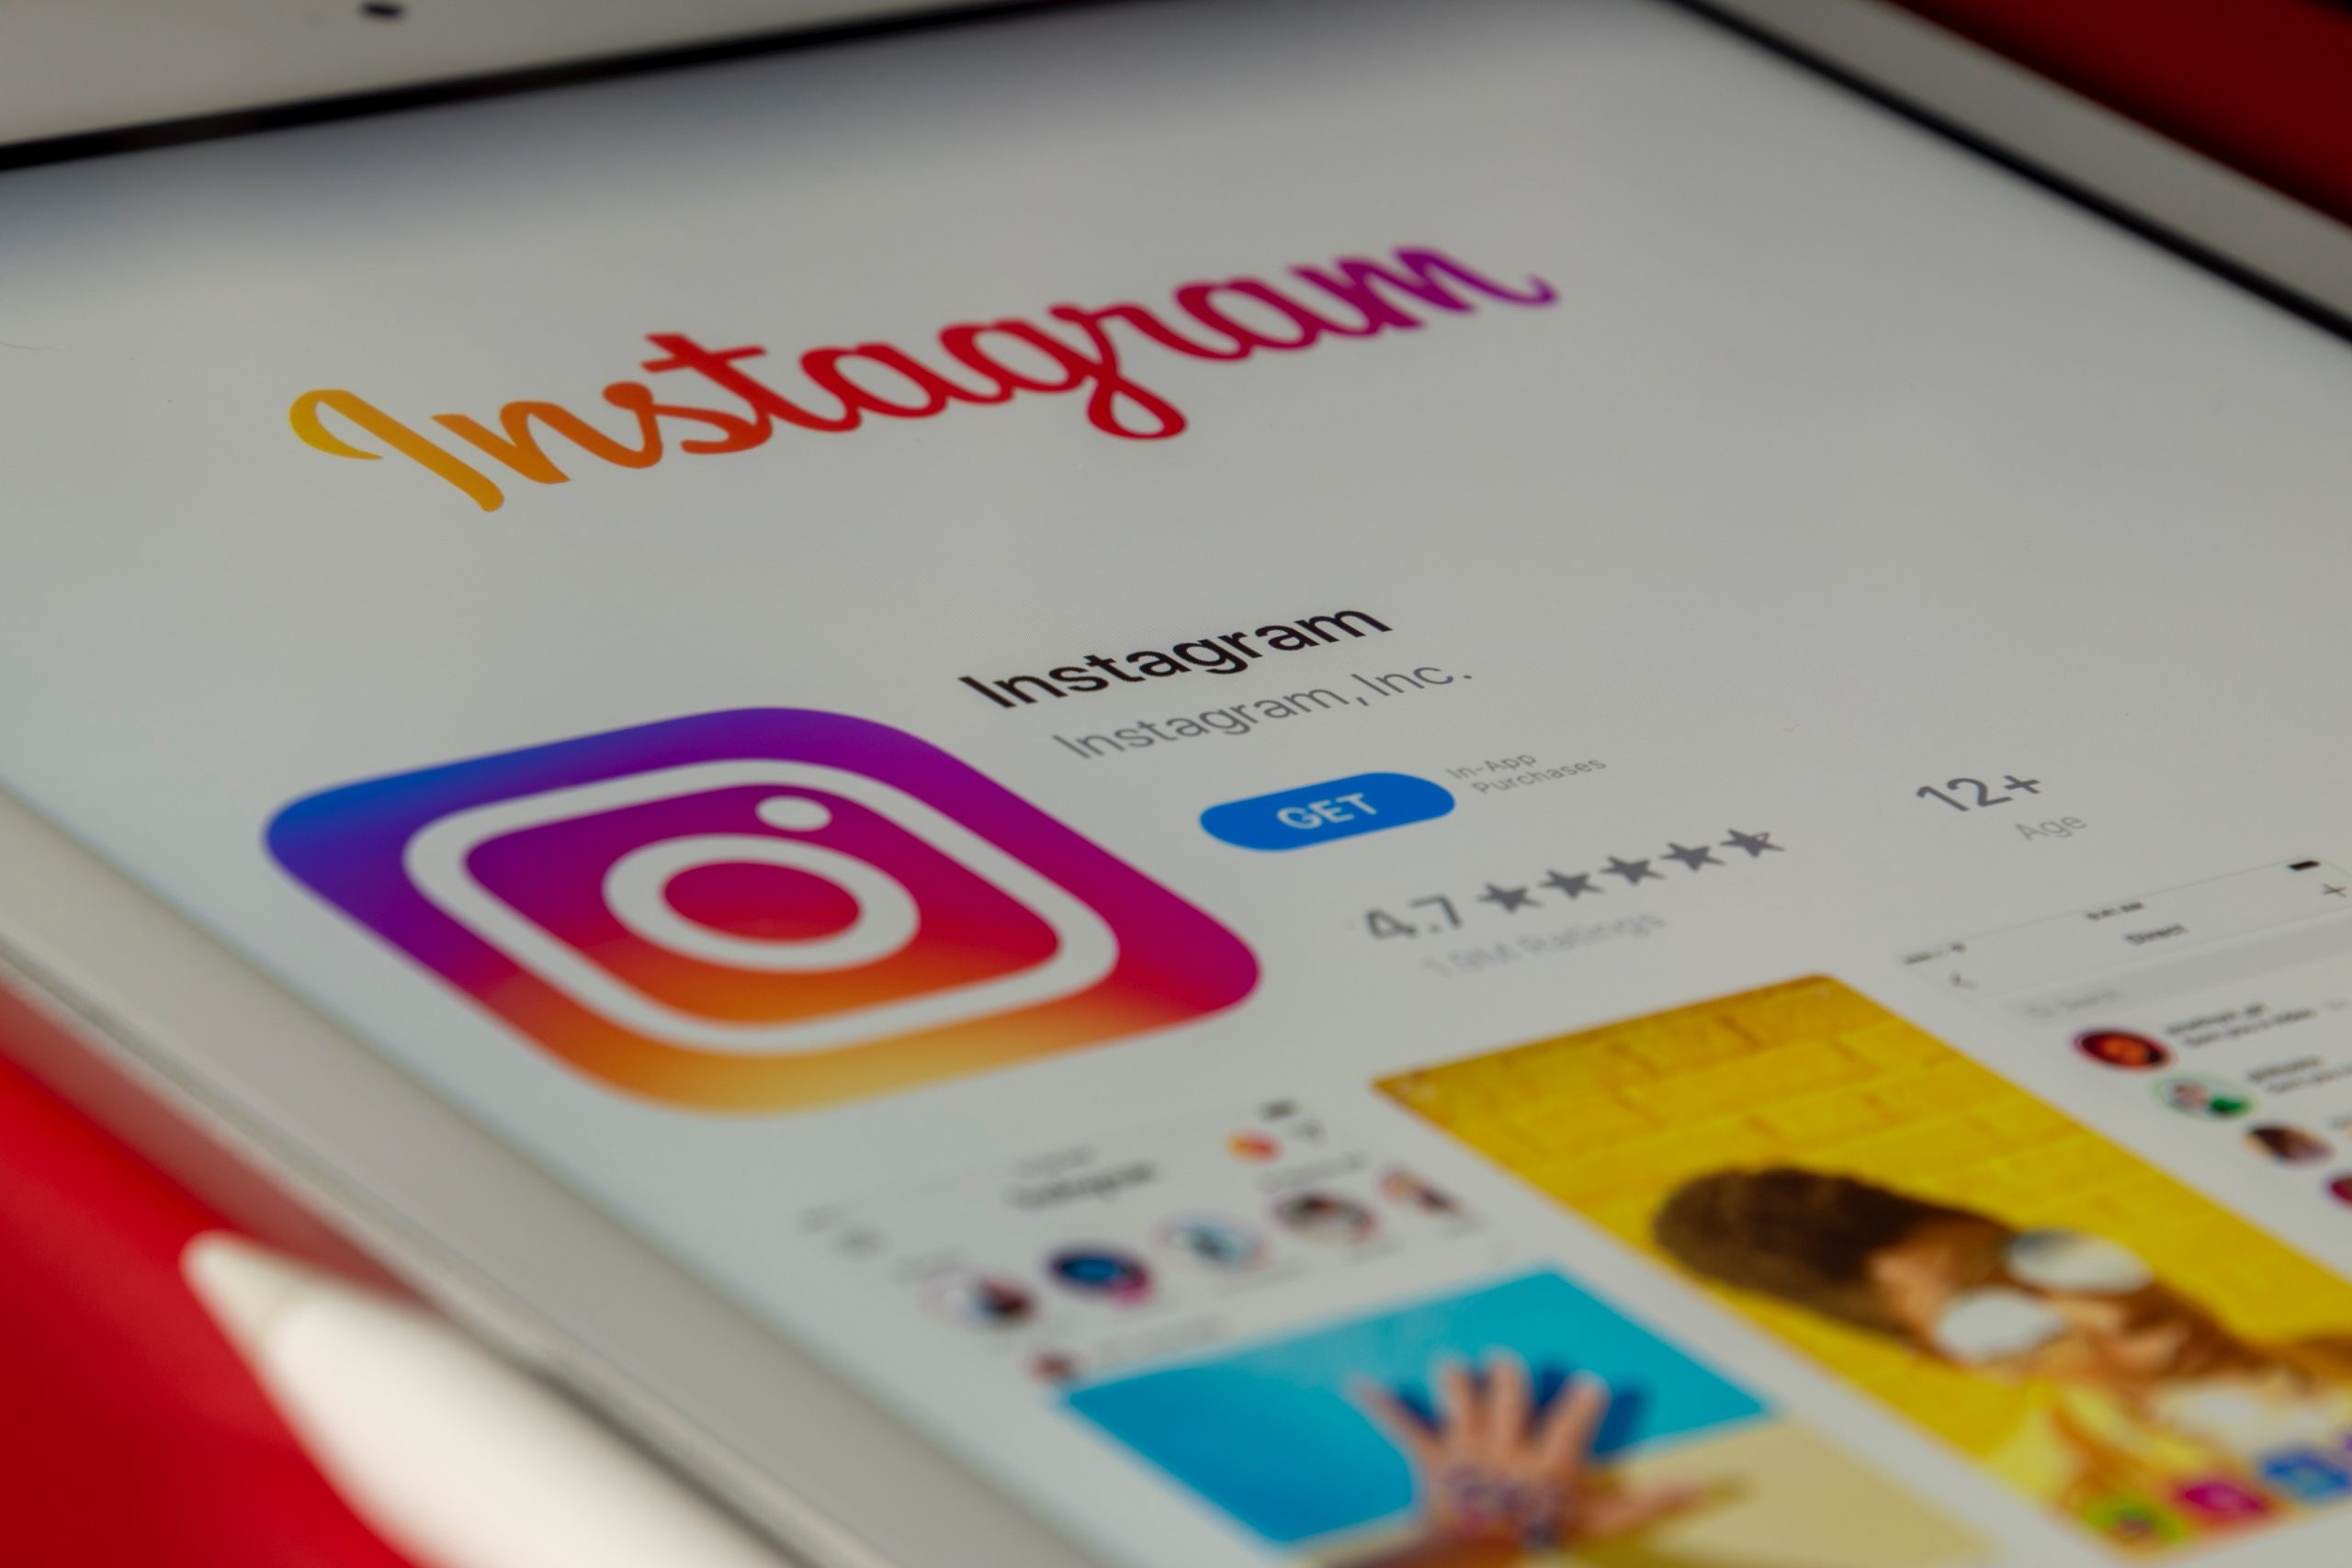 What Are Some Common Mistakes to Avoid When Trying to Gain Instagram Followers?